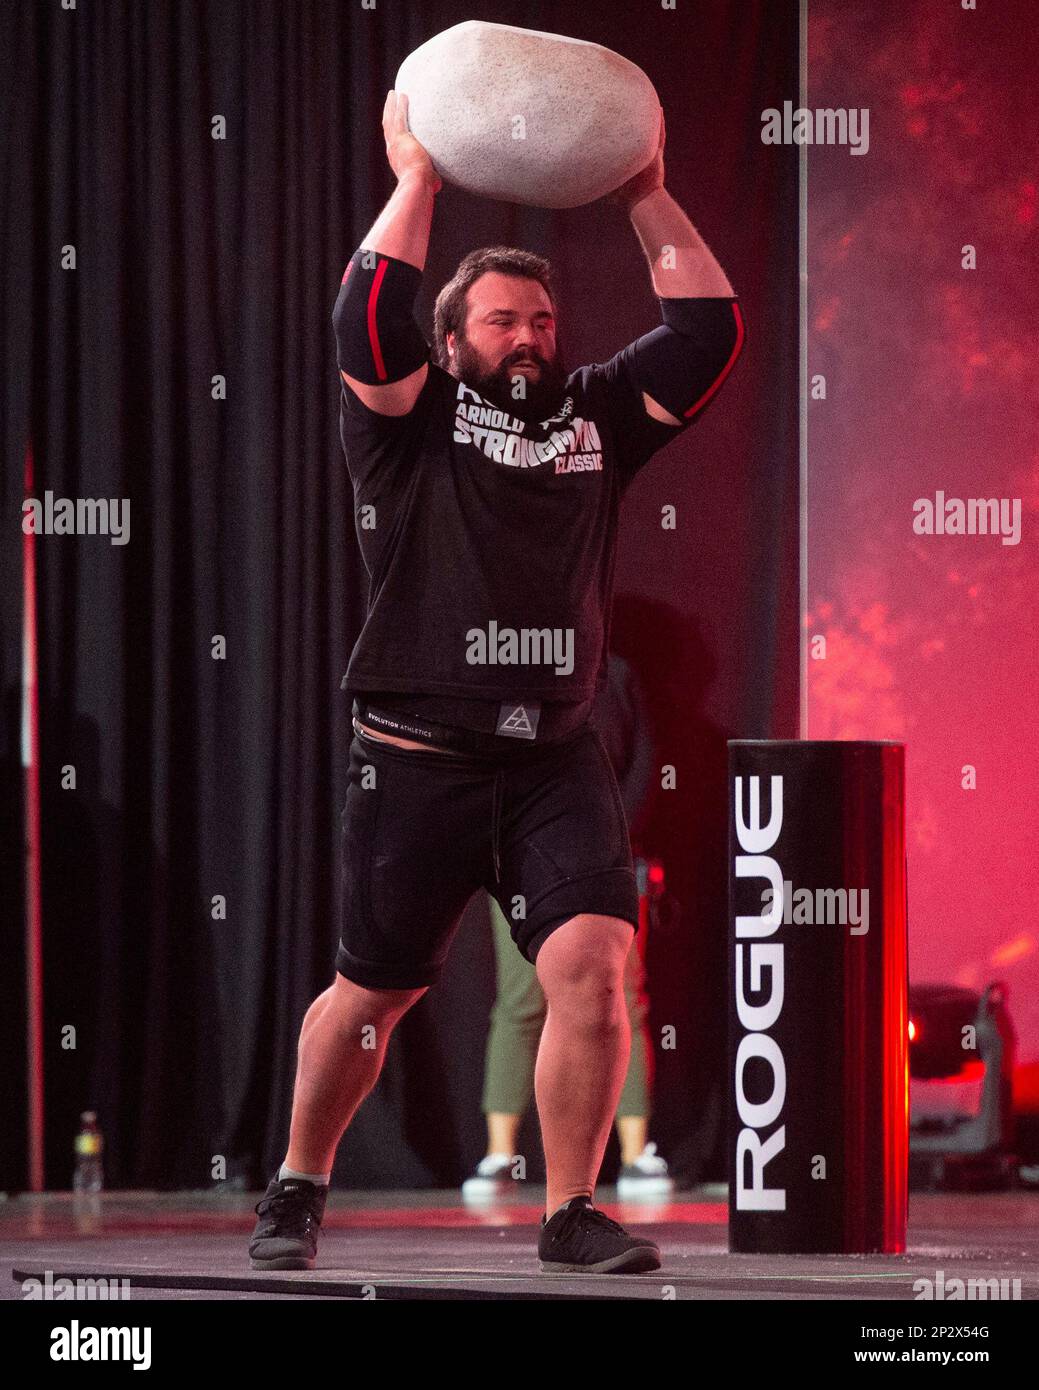 Columbus, Ohio, United States. 4th Mar, 2023. Tom Evans (USA) throws the stone 10 feet, 7 inches in the Steinstossen Stone Throw at the Arnold Strongman Classic in Columbus, Ohio. Credit: Brent Clark/Alamy Live News Stock Photo